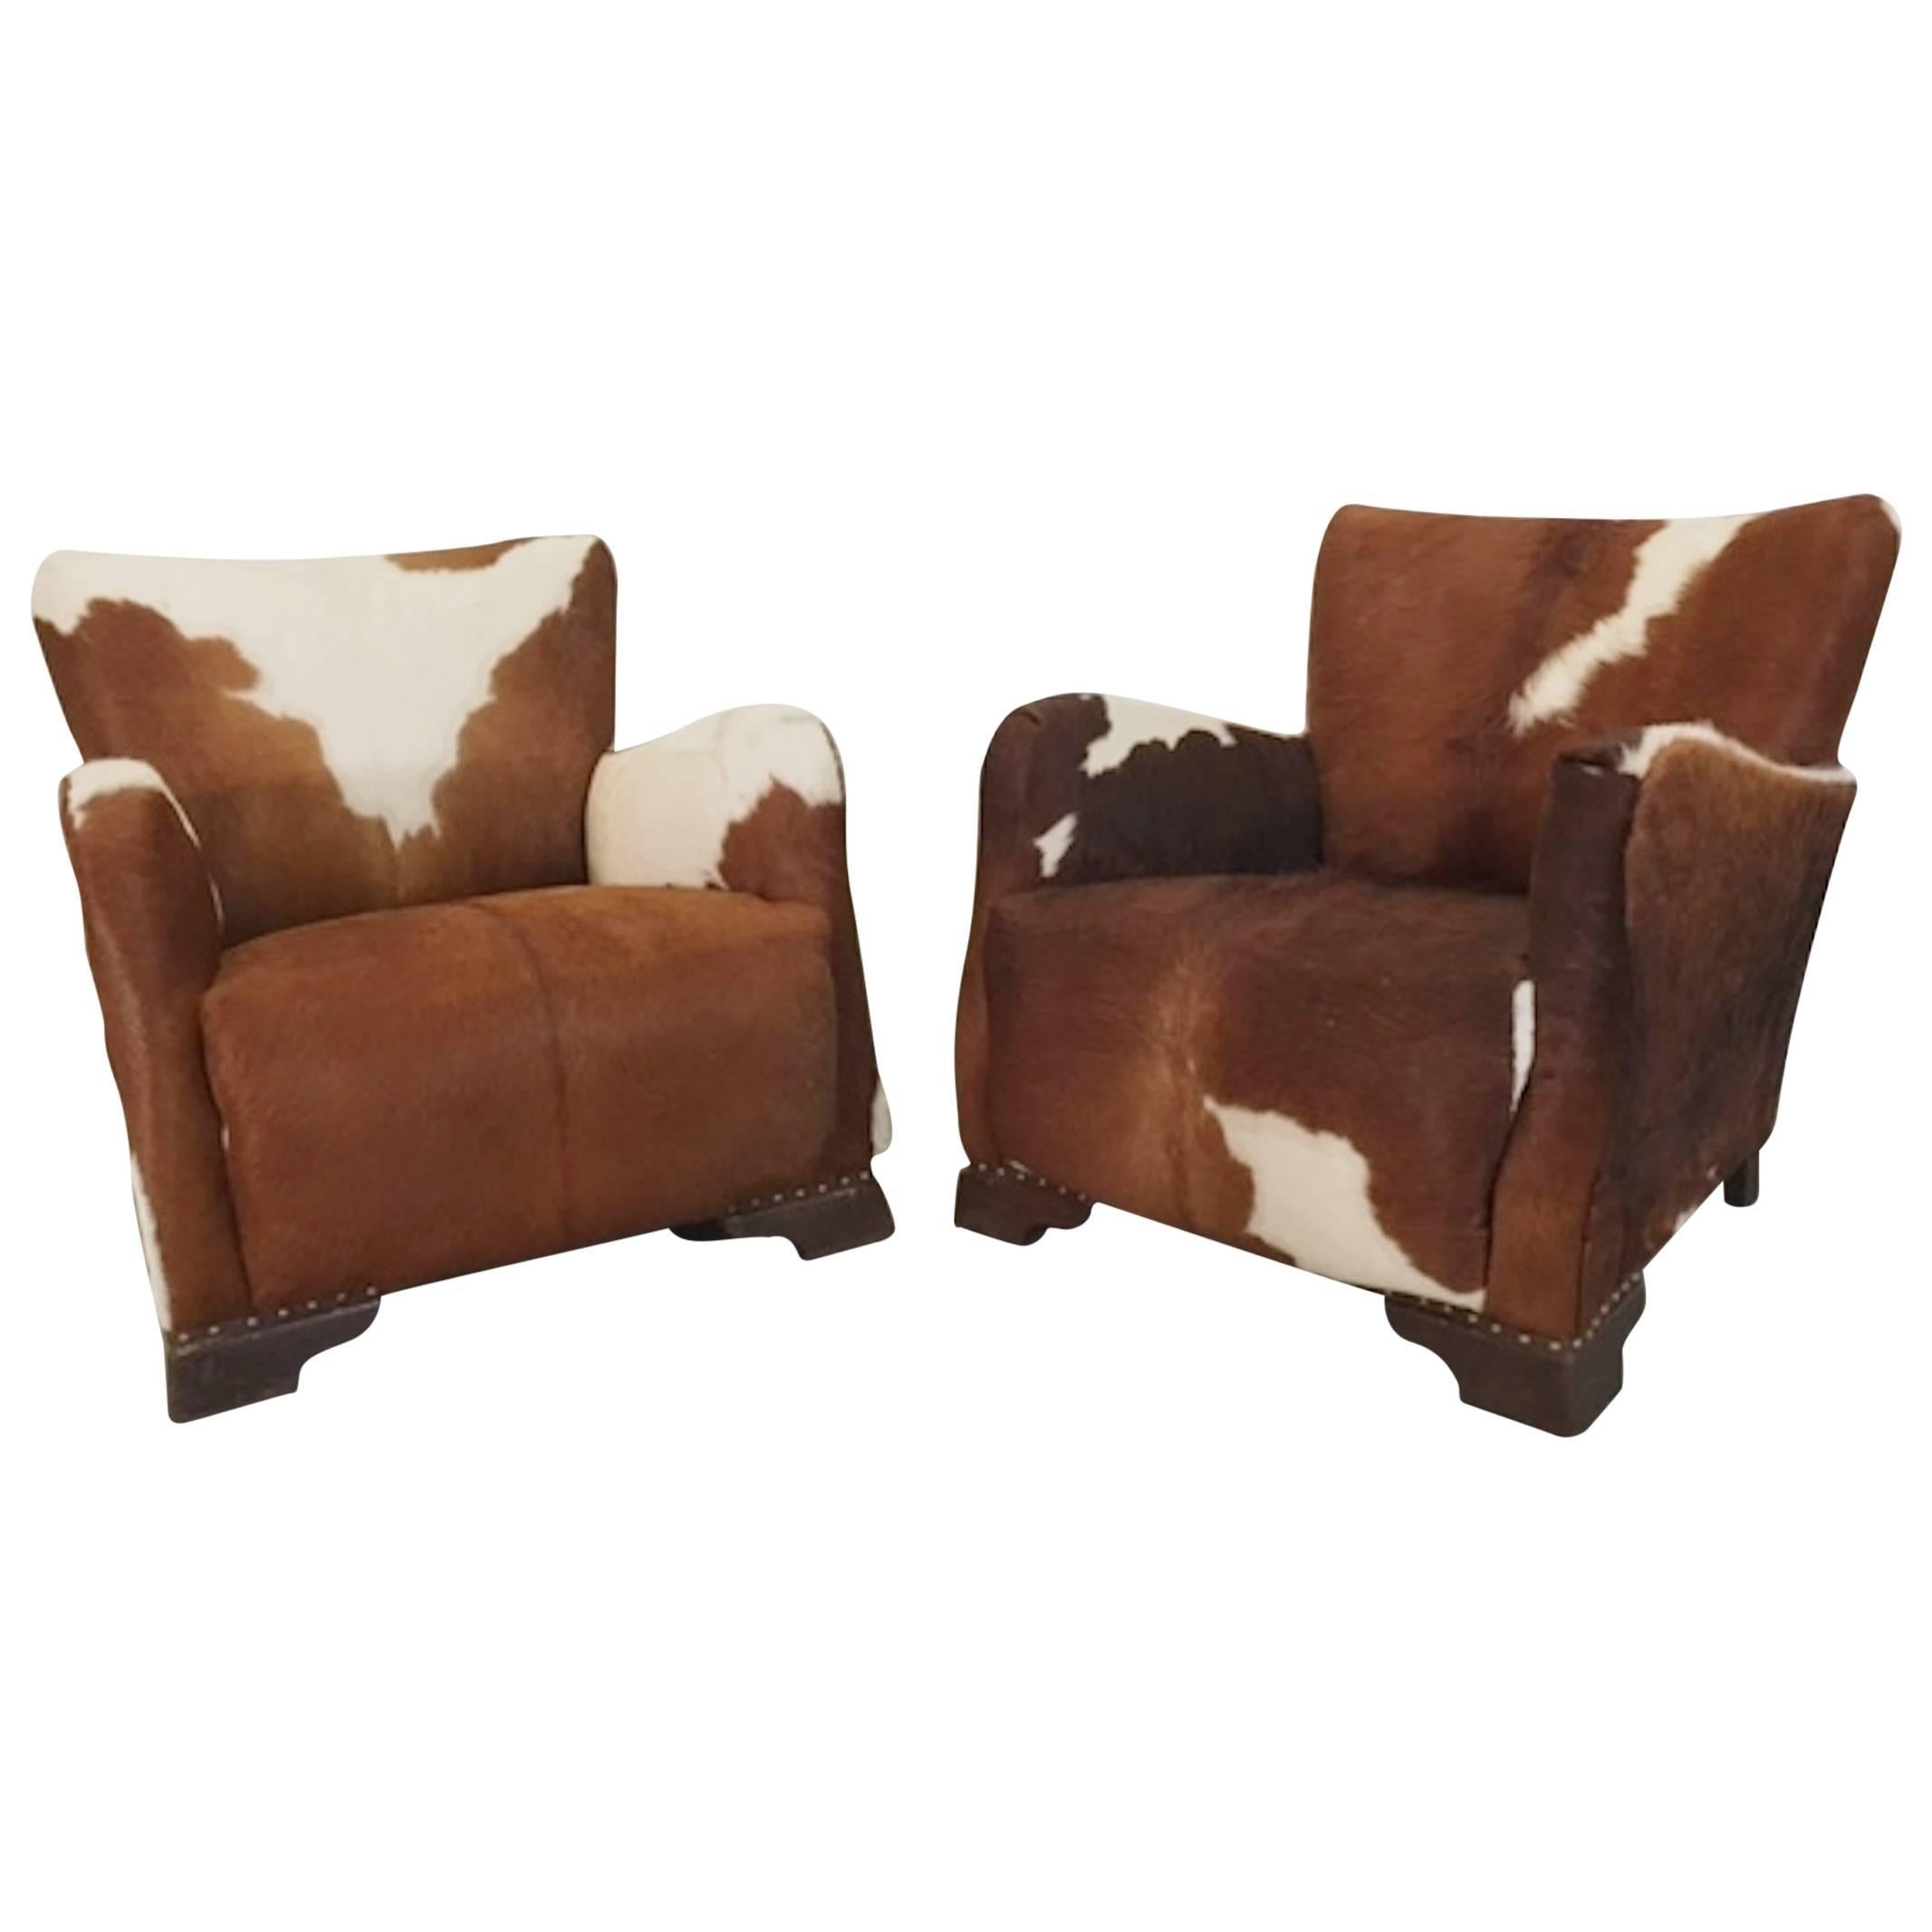 Pair of Unique French Smoking Chairs in Stunning Cowhide